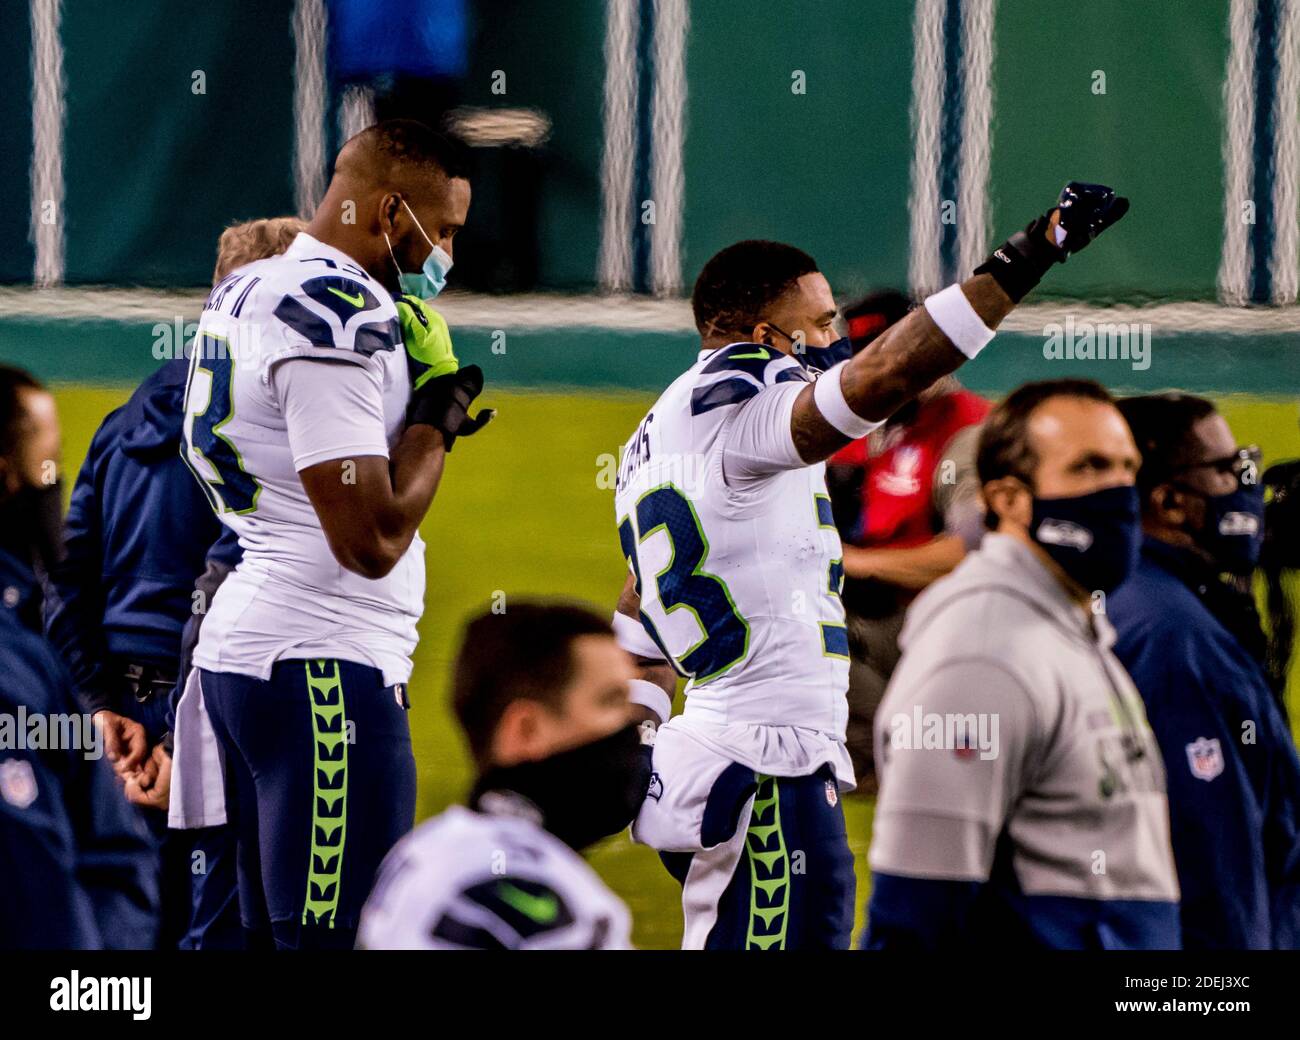 Philadelphia, PA, USA. 30th Nov, 2020. November 30, 2020: Seattle strong safety Jamal Adams raises a fist during the National Anthem before the NFL football matchup between the Seattle Seahawks and the Philadelphia Eagles at Lincoln Financial Field in Philadelphia, Pennsylvania. Scott Serio/Cal Sport Media/Alamy Live News Stock Photo